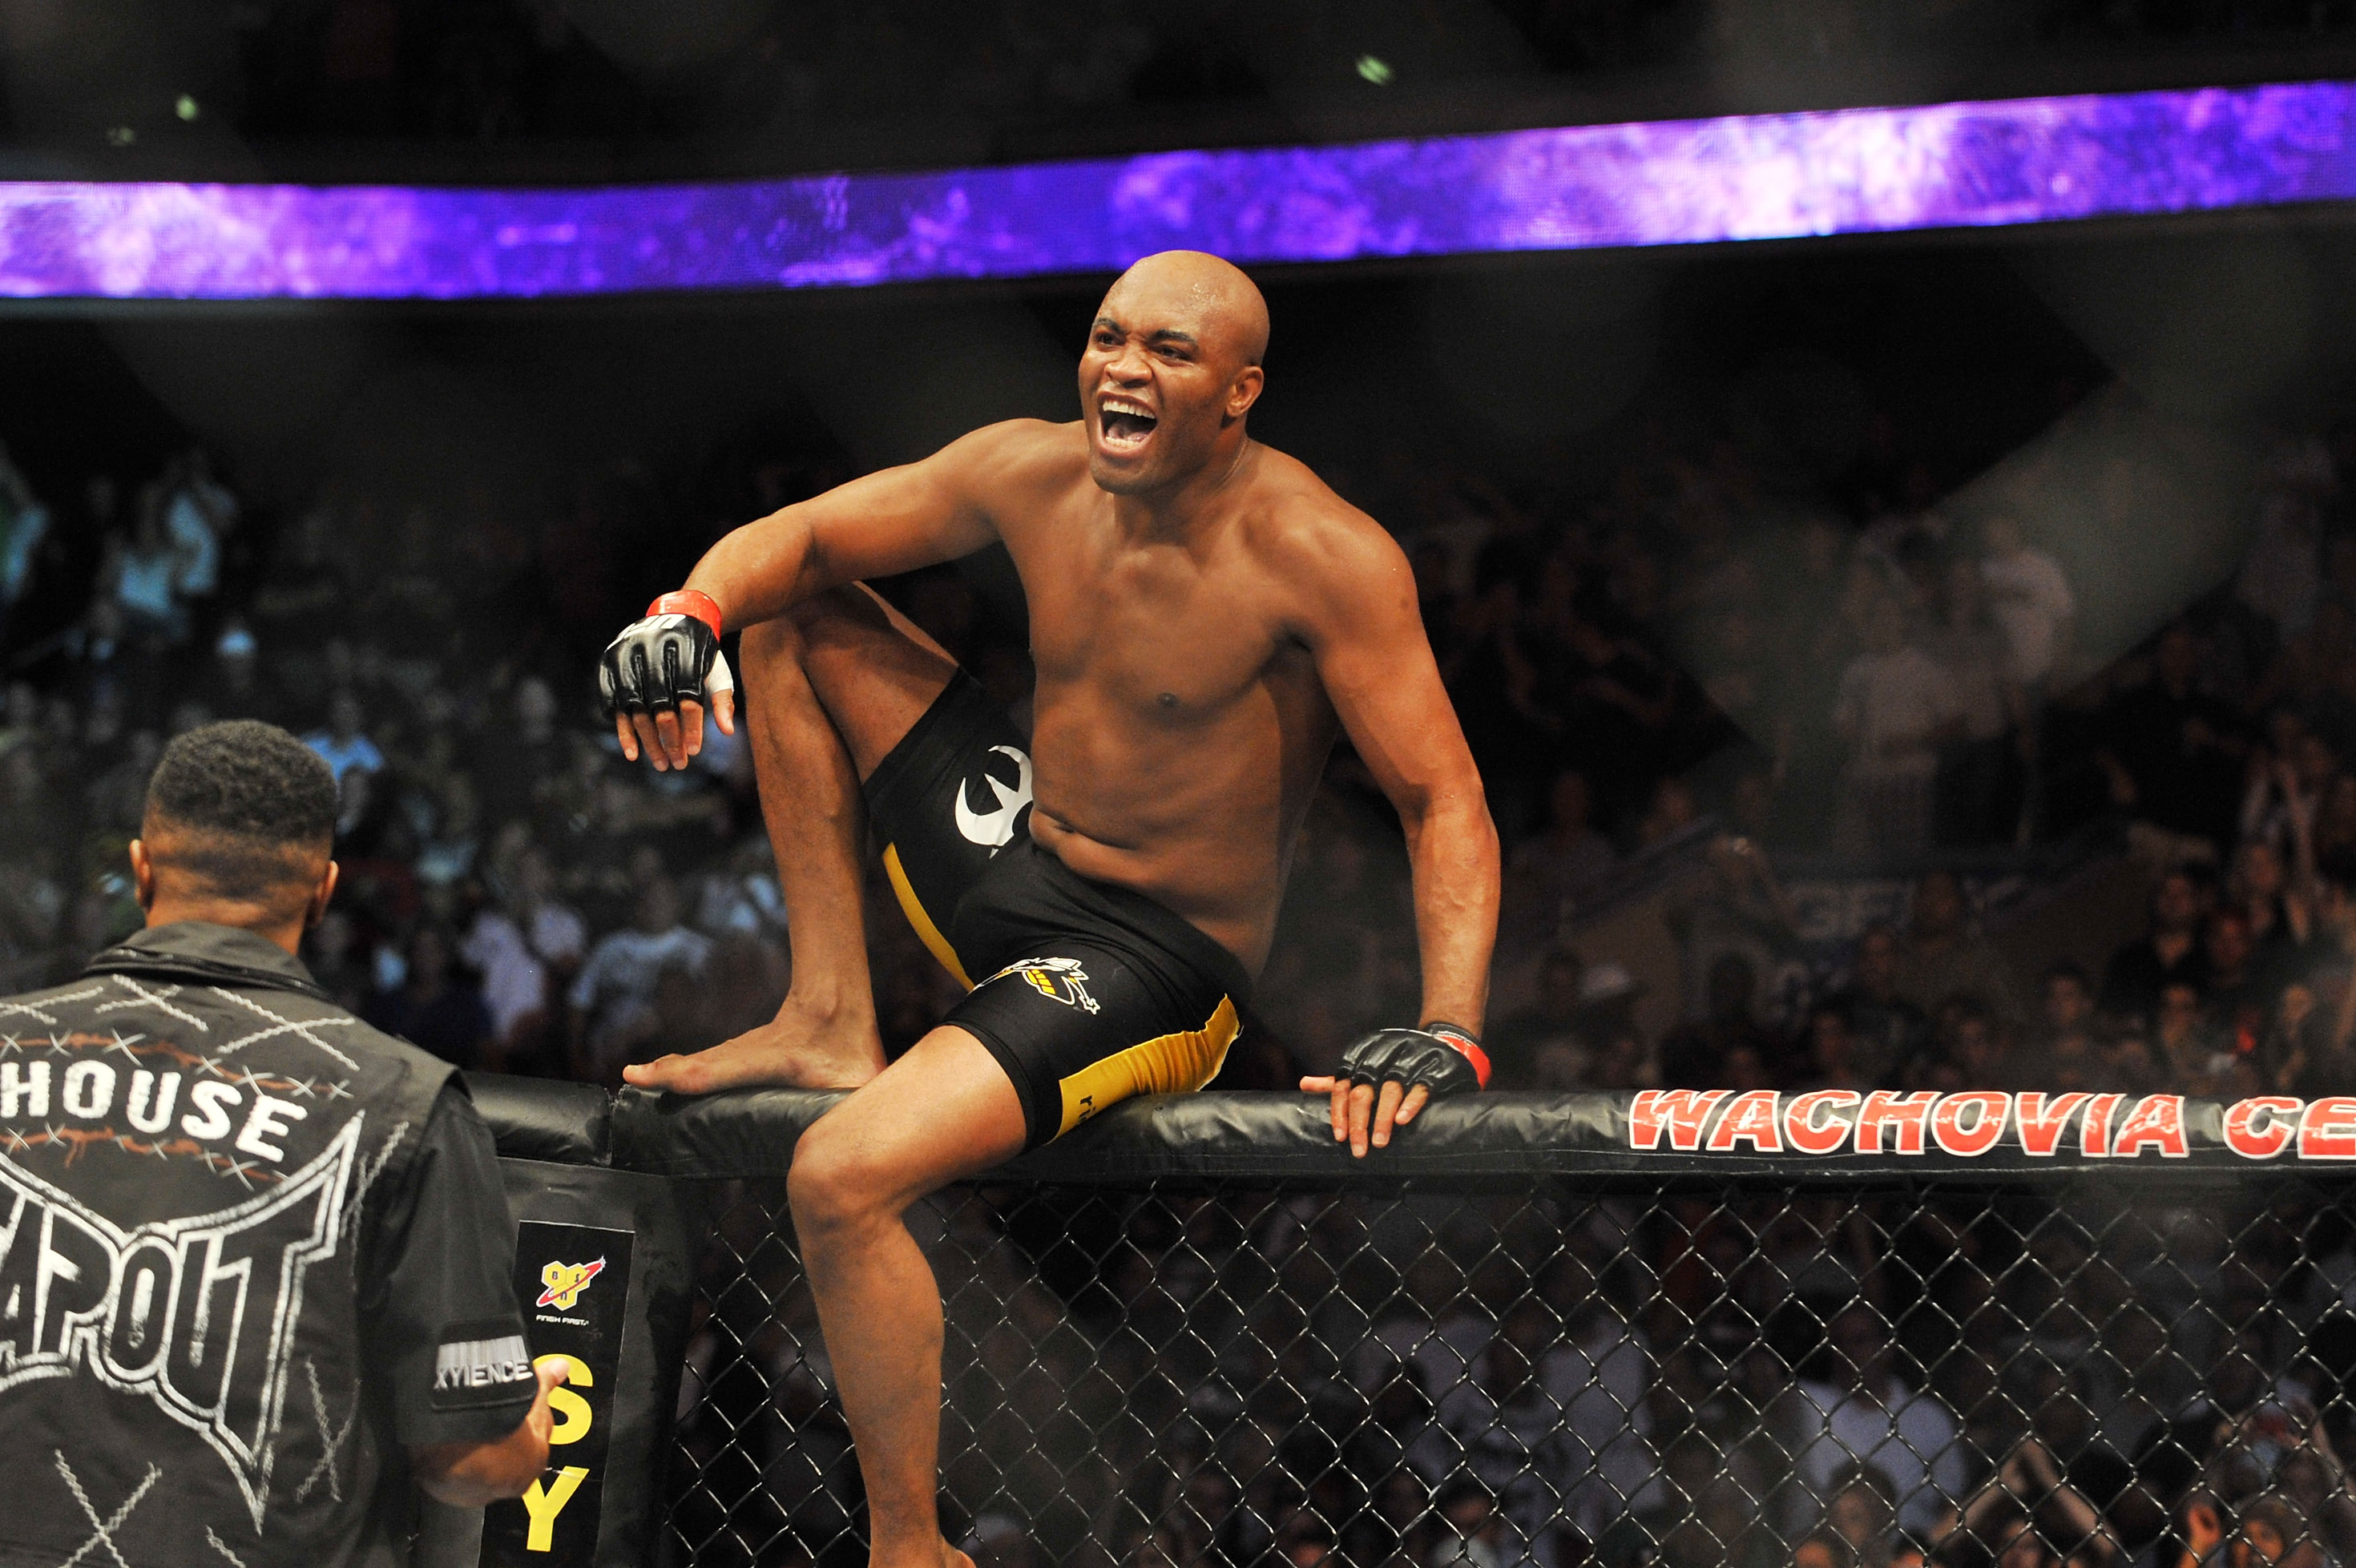 UFC 134 Rio Fight Card: The 50 Best Brazilian Fighters Currently